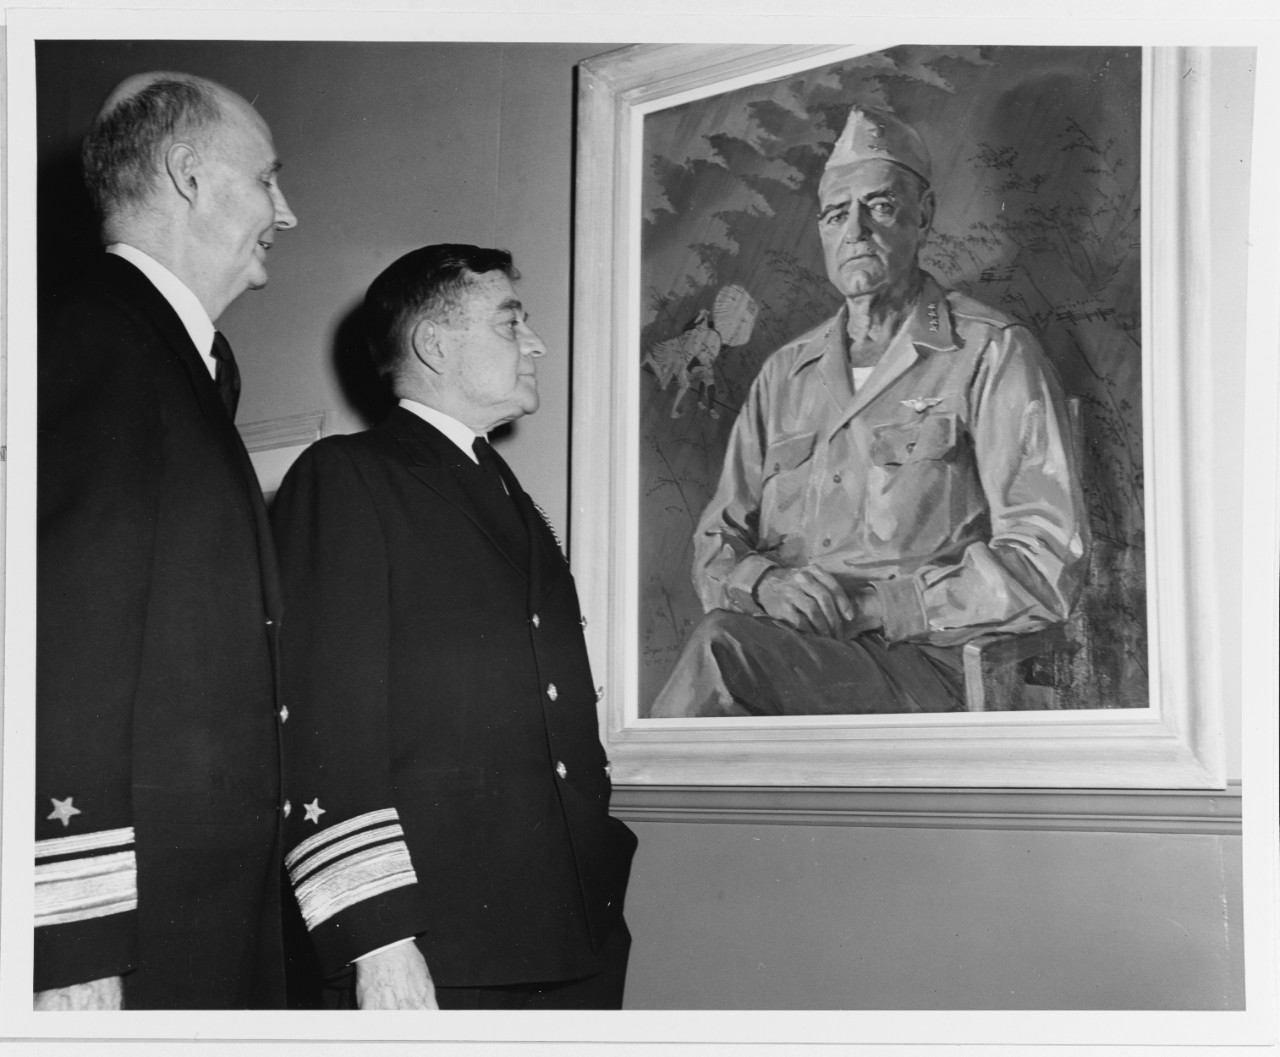 Rear Admiral Henry Williams, USN, left, and Vice Admiral Richard S. Edwards, USN